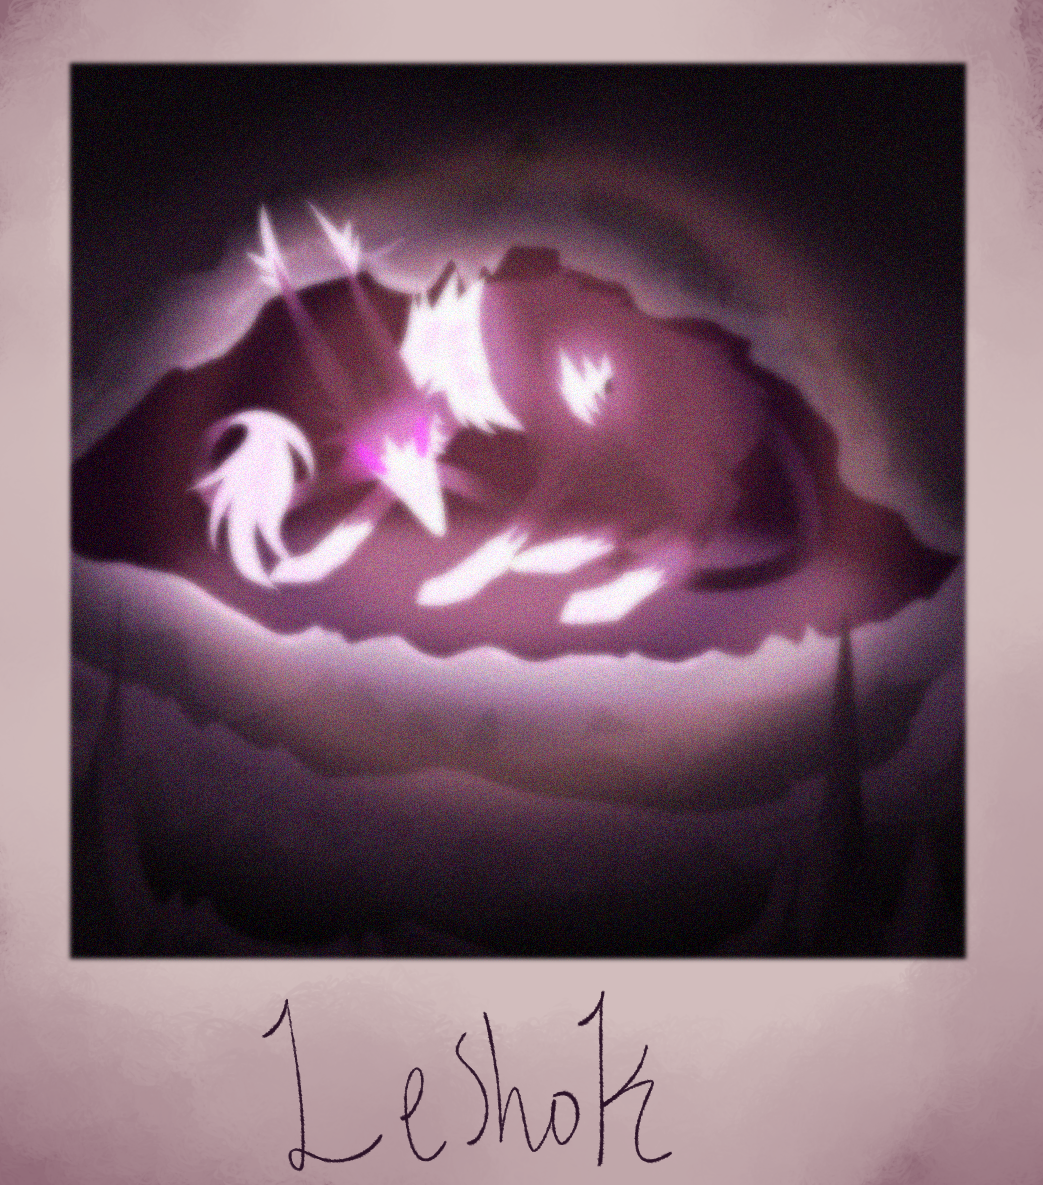 A digital drawing made to look like a polaroid of a black creature with glowing markings hunched on all fours in a cave.